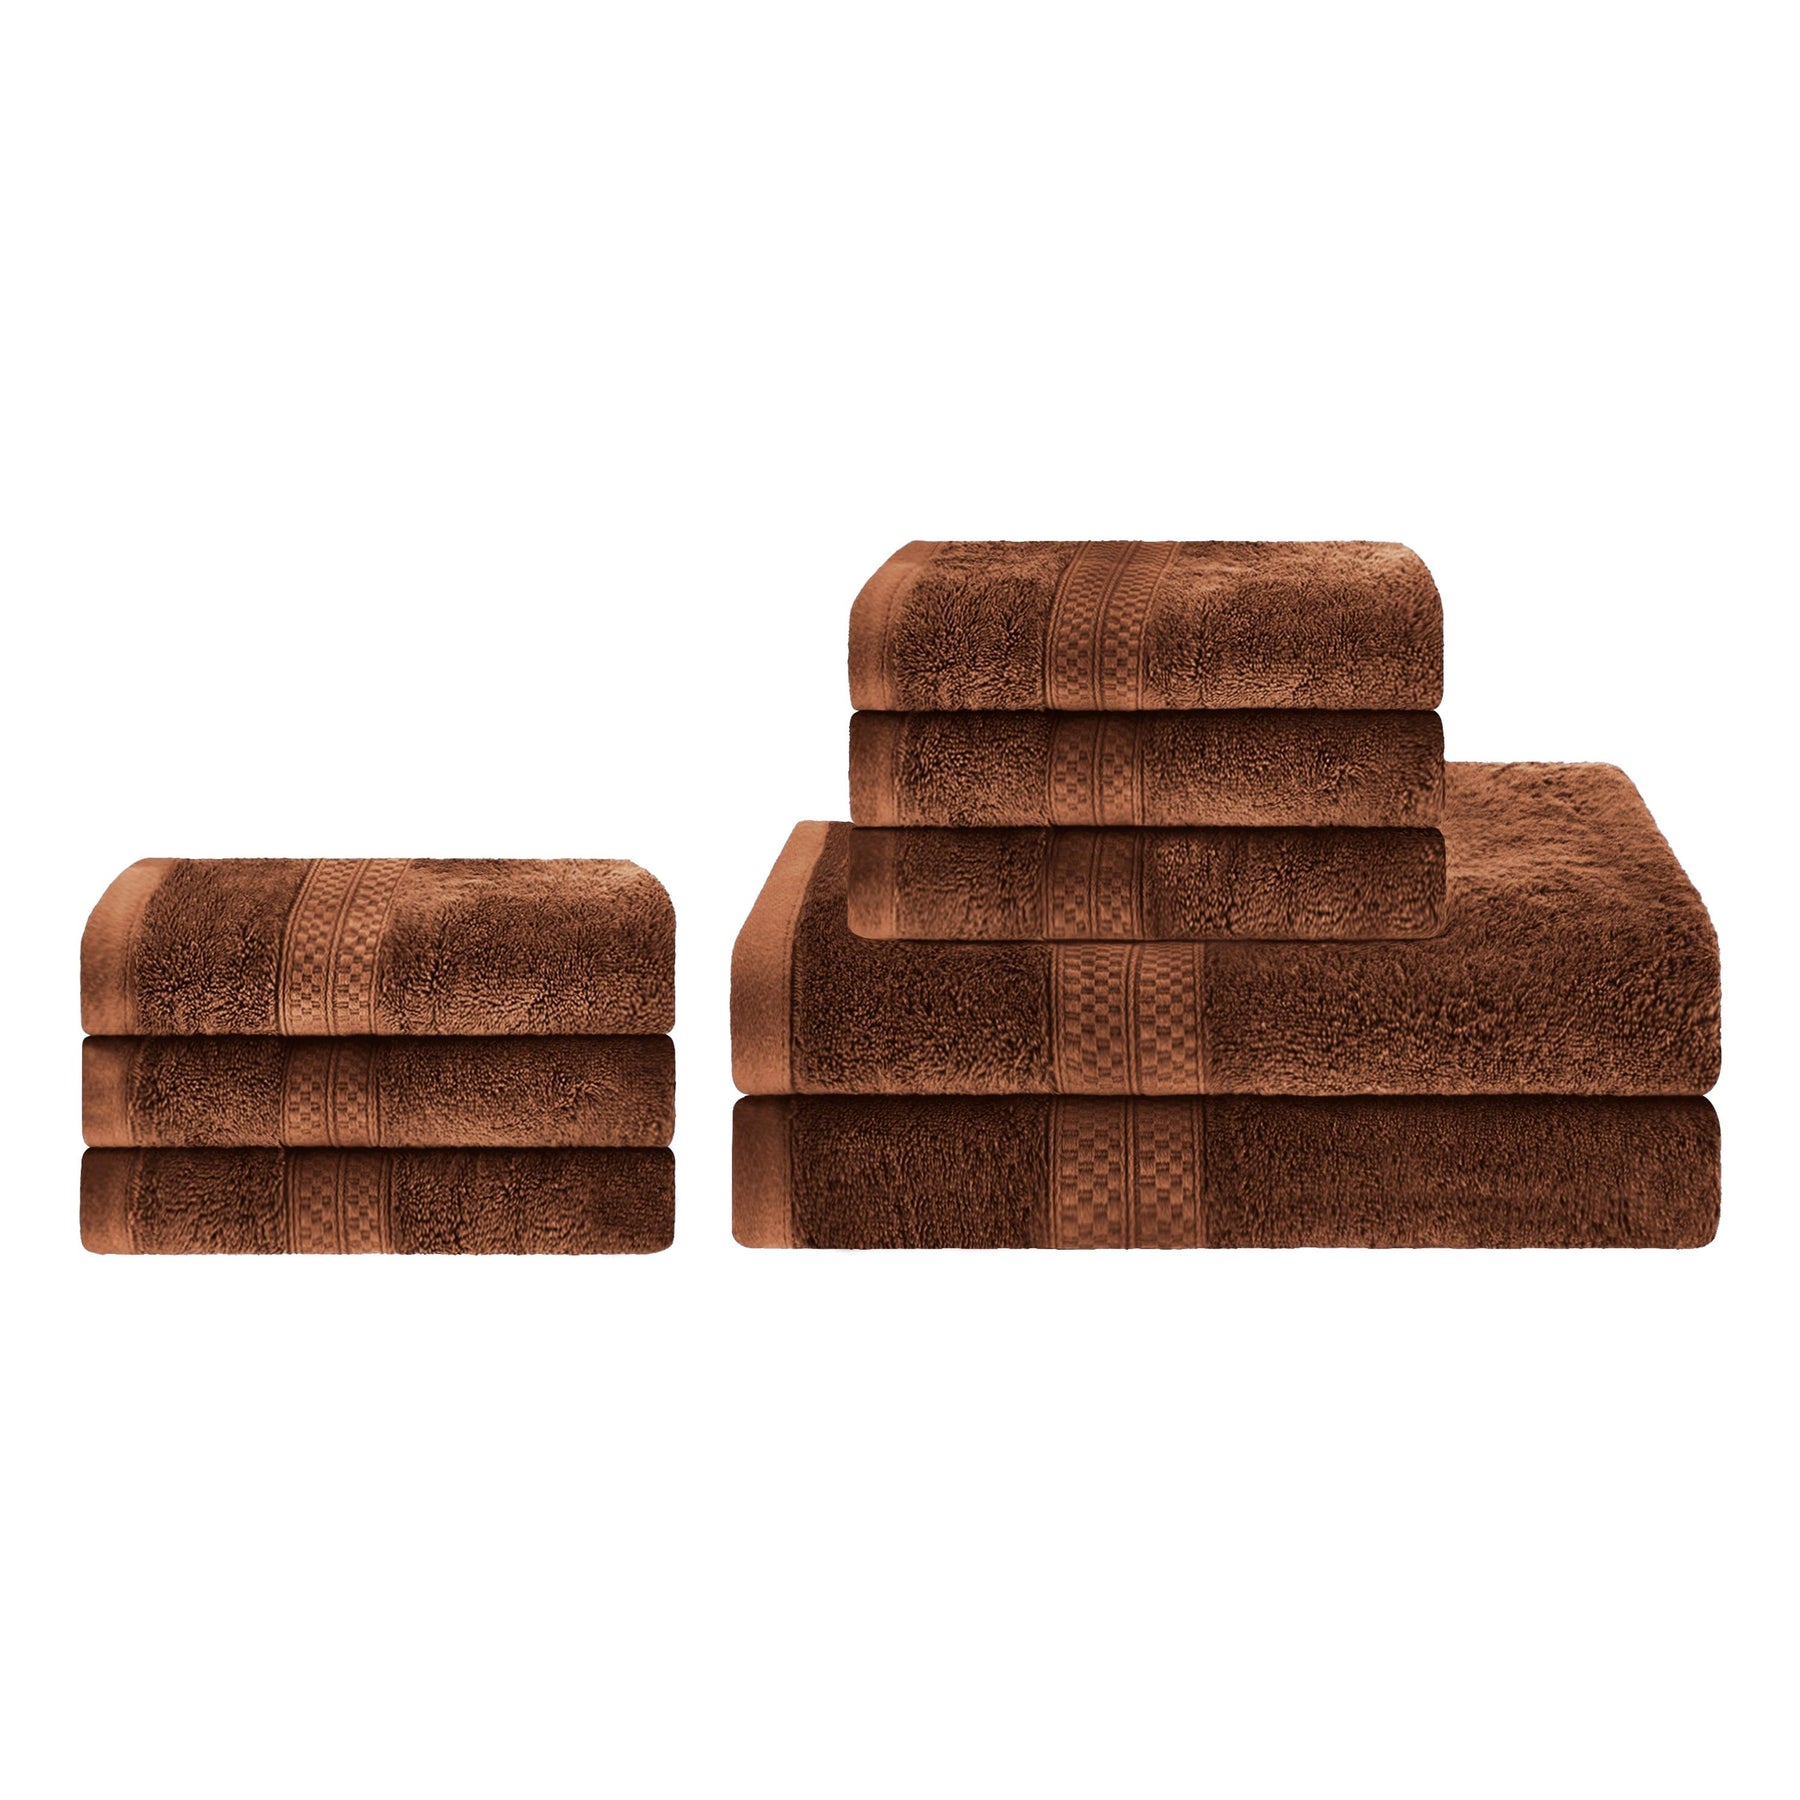 Ultra-Soft Hypoallergenic Rayon from Bamboo Cotton Blend Bath and Hand Towel Set - Cocoa